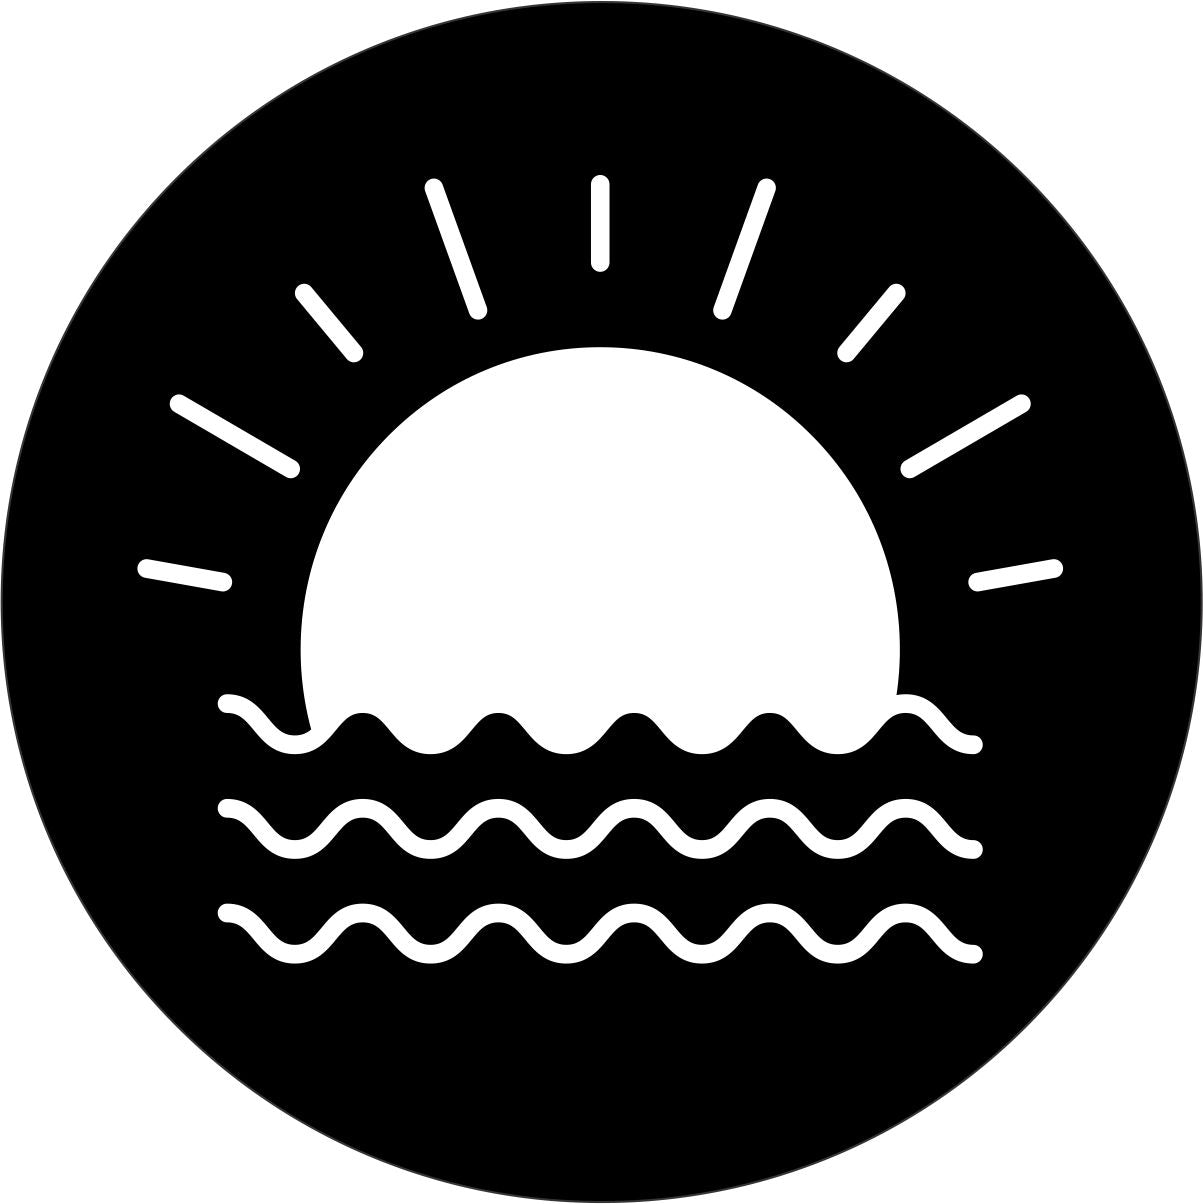 A simple sun sitting and setting on the water spare tire cover design.